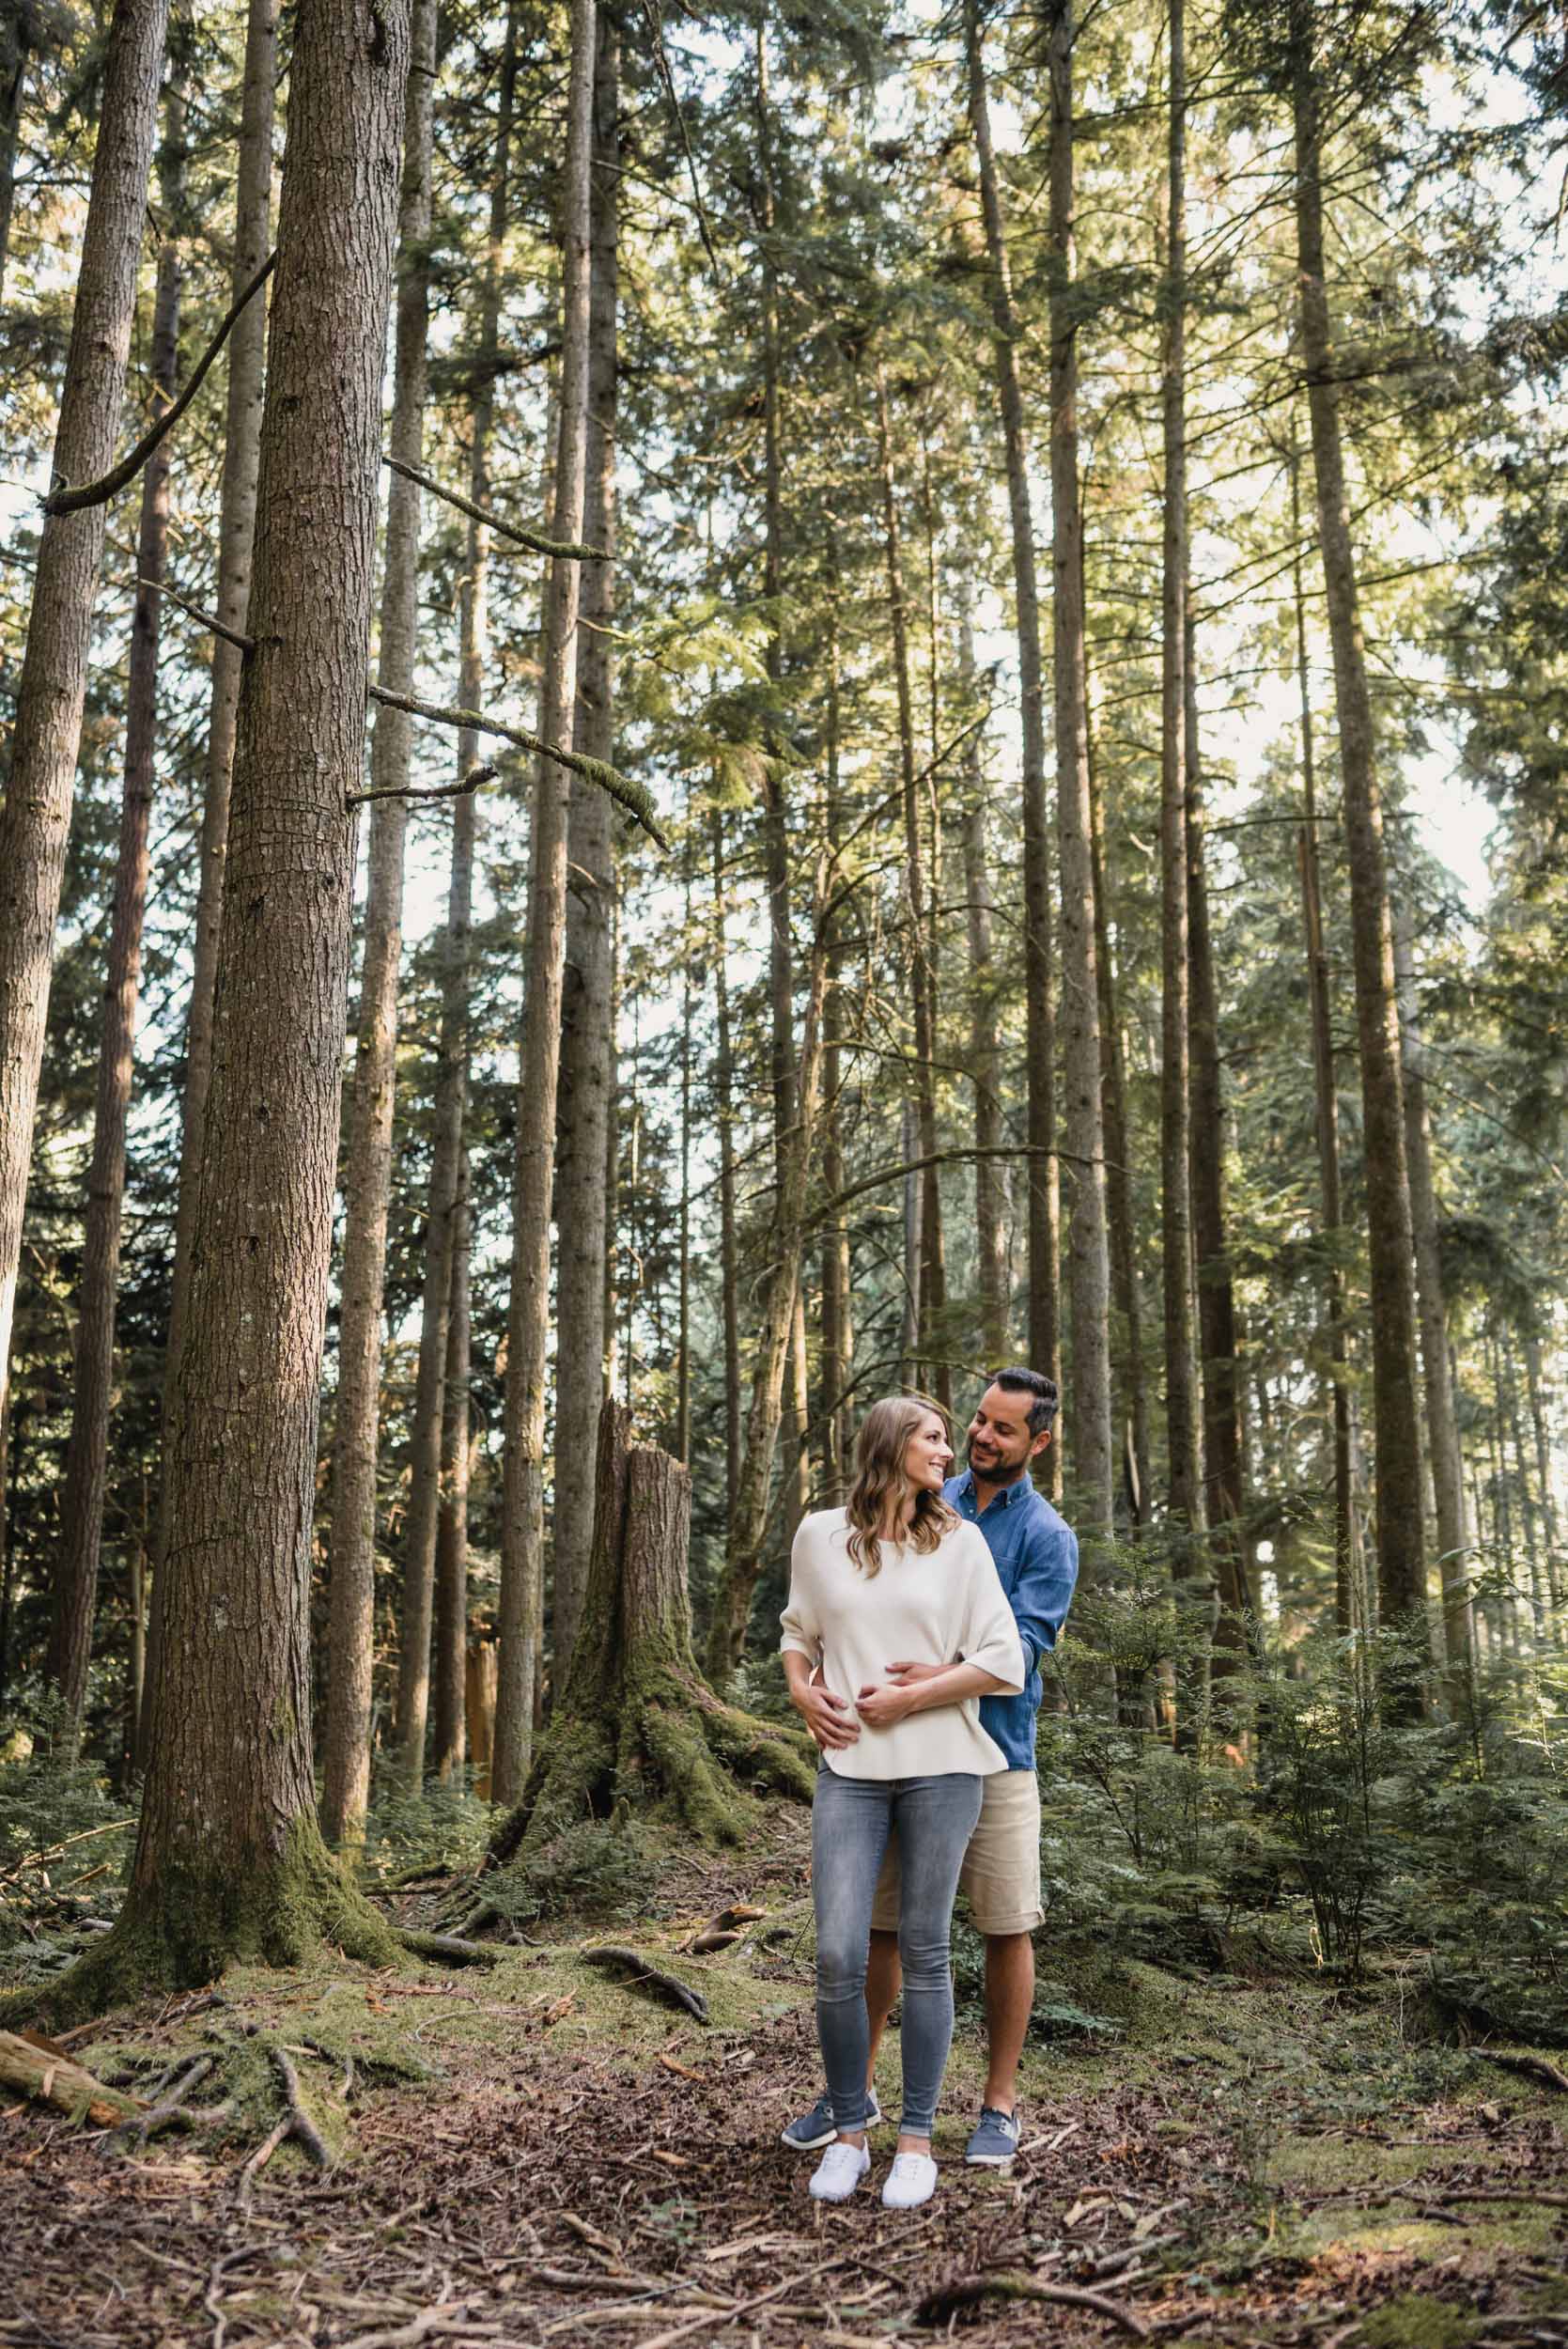 Couple embraces in the forest